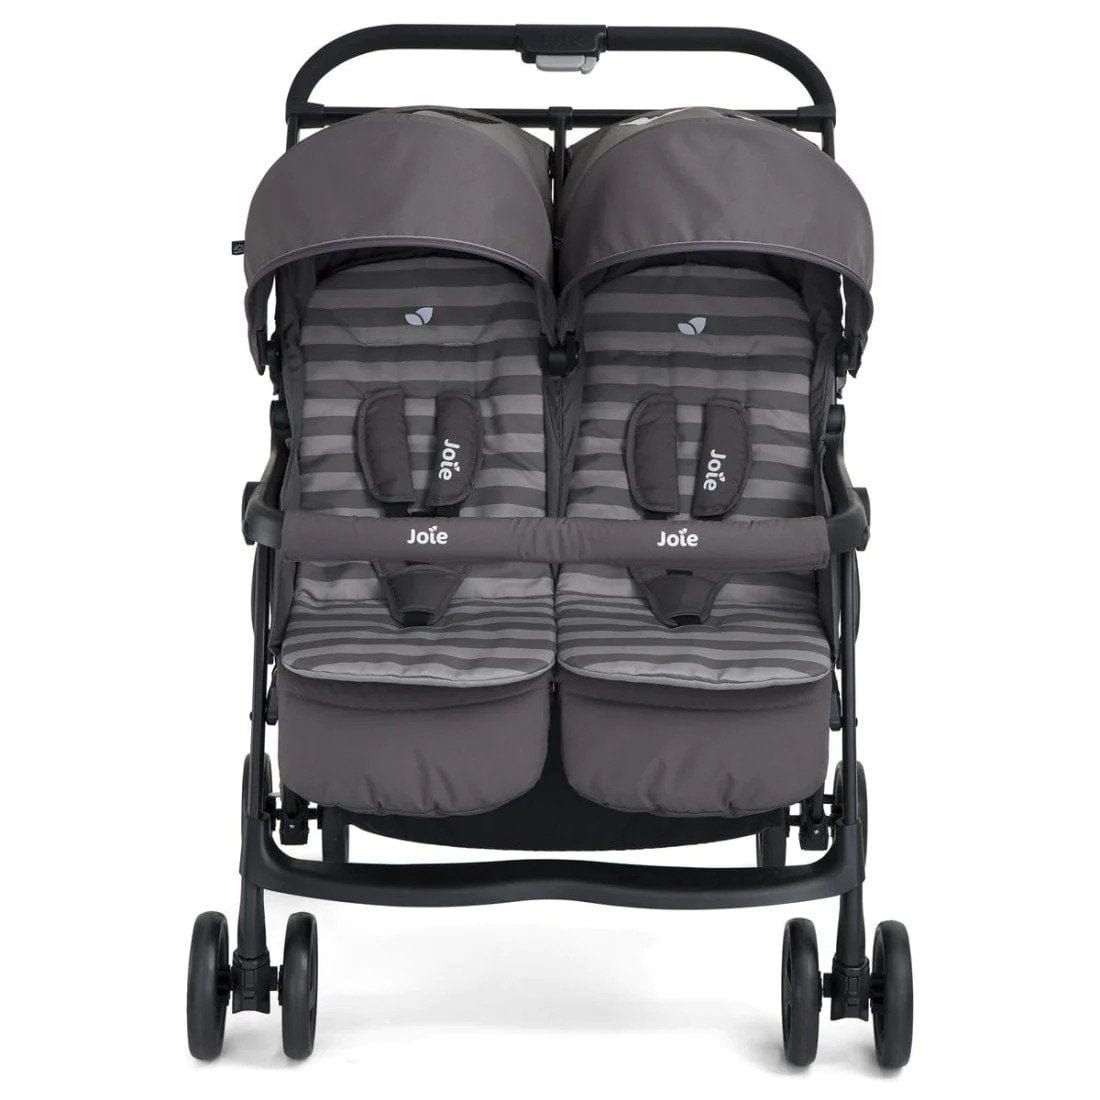 Joie double buggies Joie Aire Twin Stroller (inc footmuff & raincover) - Dark Pewter S1217AHDPW000